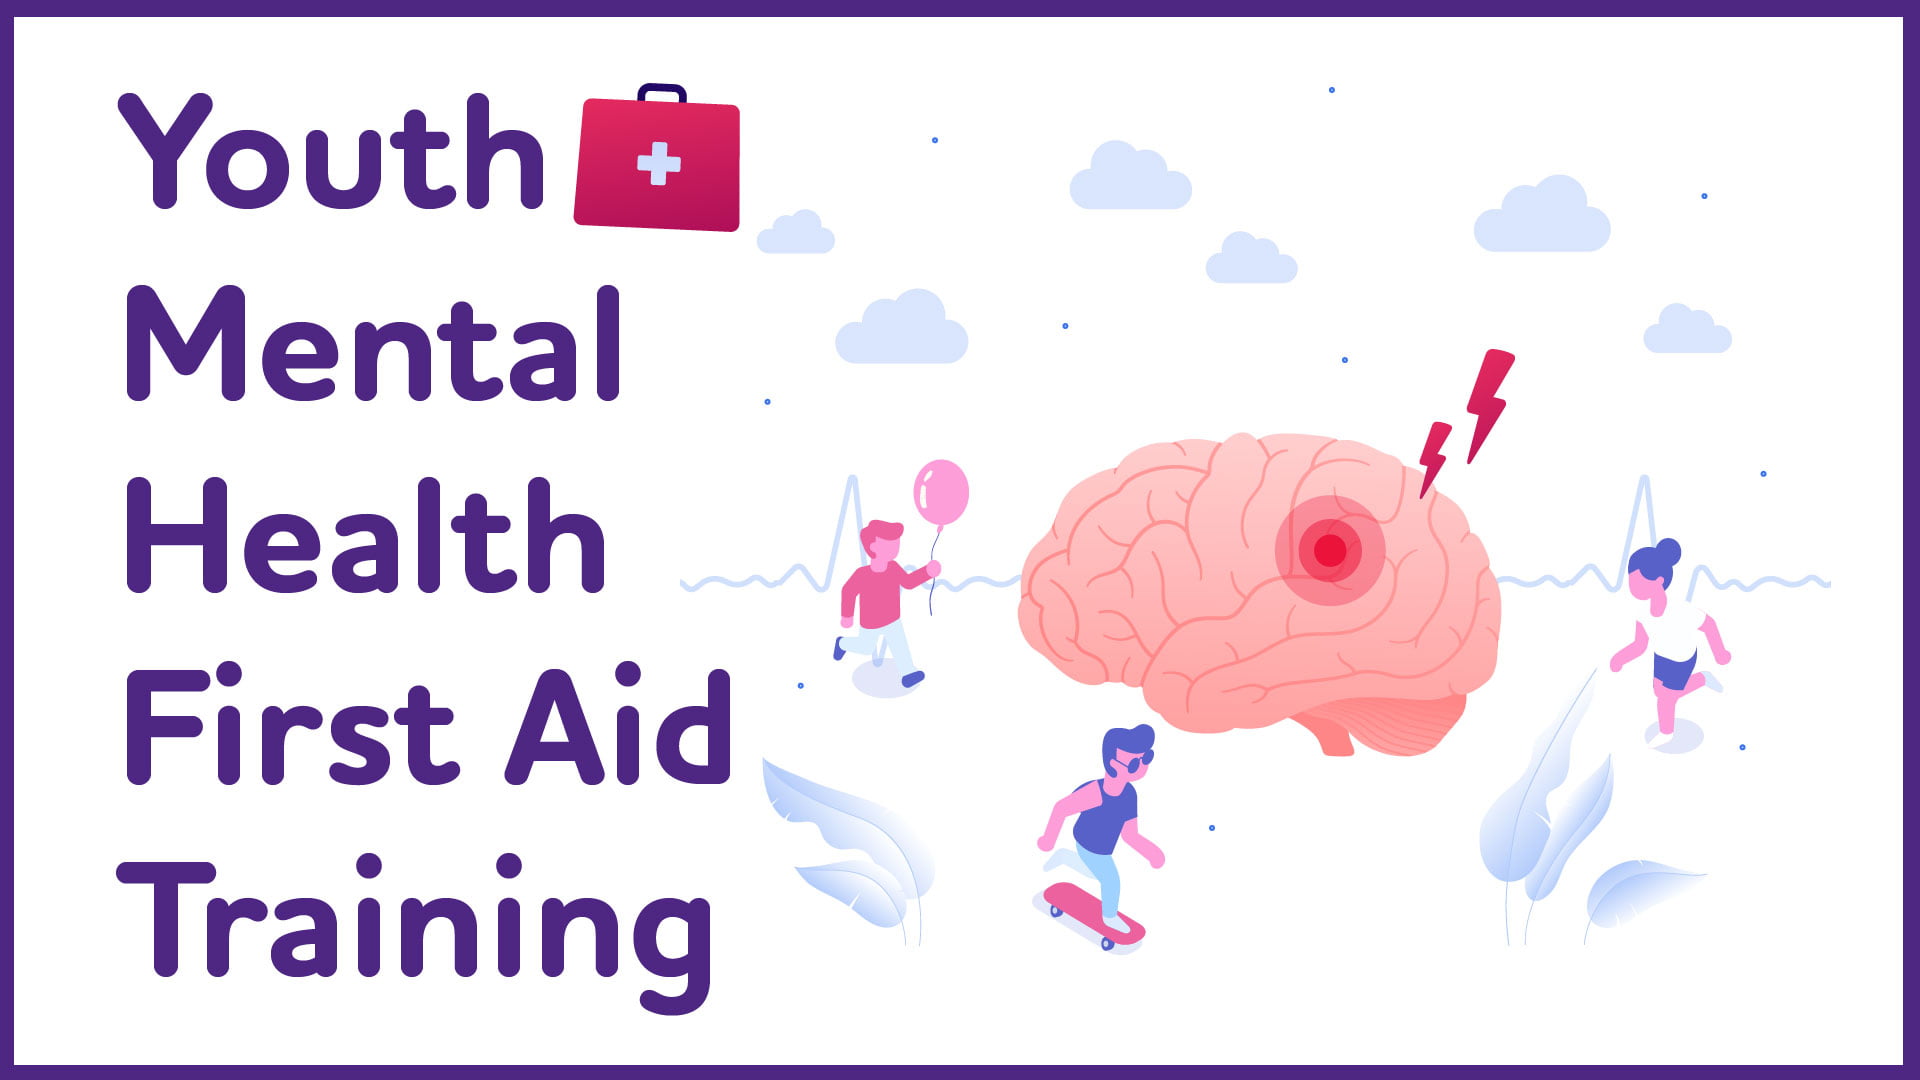 AD READING: YOUTH MENTAL HEALTH FIRST AID TRAINING